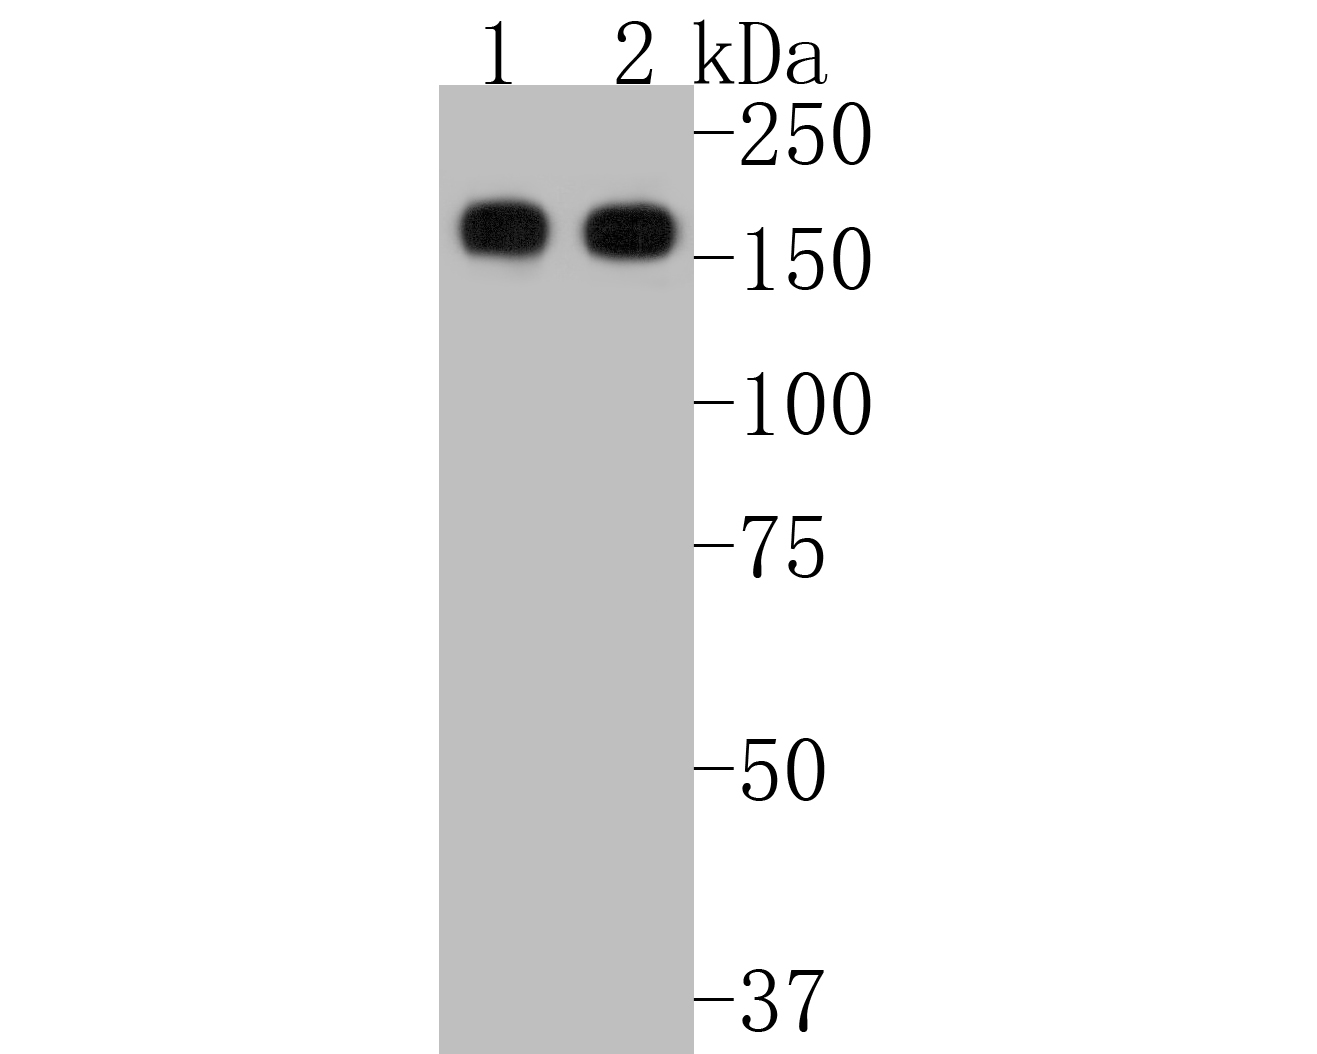 Western blot analysis of CD13 on different lysates. Proteins were transferred to a PVDF membrane and blocked with 5% BSA in PBS for 1 hour at room temperature. The primary antibody (ET1610-59, 1/500) was used in 5% BSA at room temperature for 2 hours. Goat Anti-Rabbit IgG - HRP Secondary Antibody (HA1001) at 1:5,000 dilution was used for 1 hour at room temperature.<br />
Positive control: <br />
Lane 1: human heart tissue lysate<br />
Lane 2: U937 cell lysate